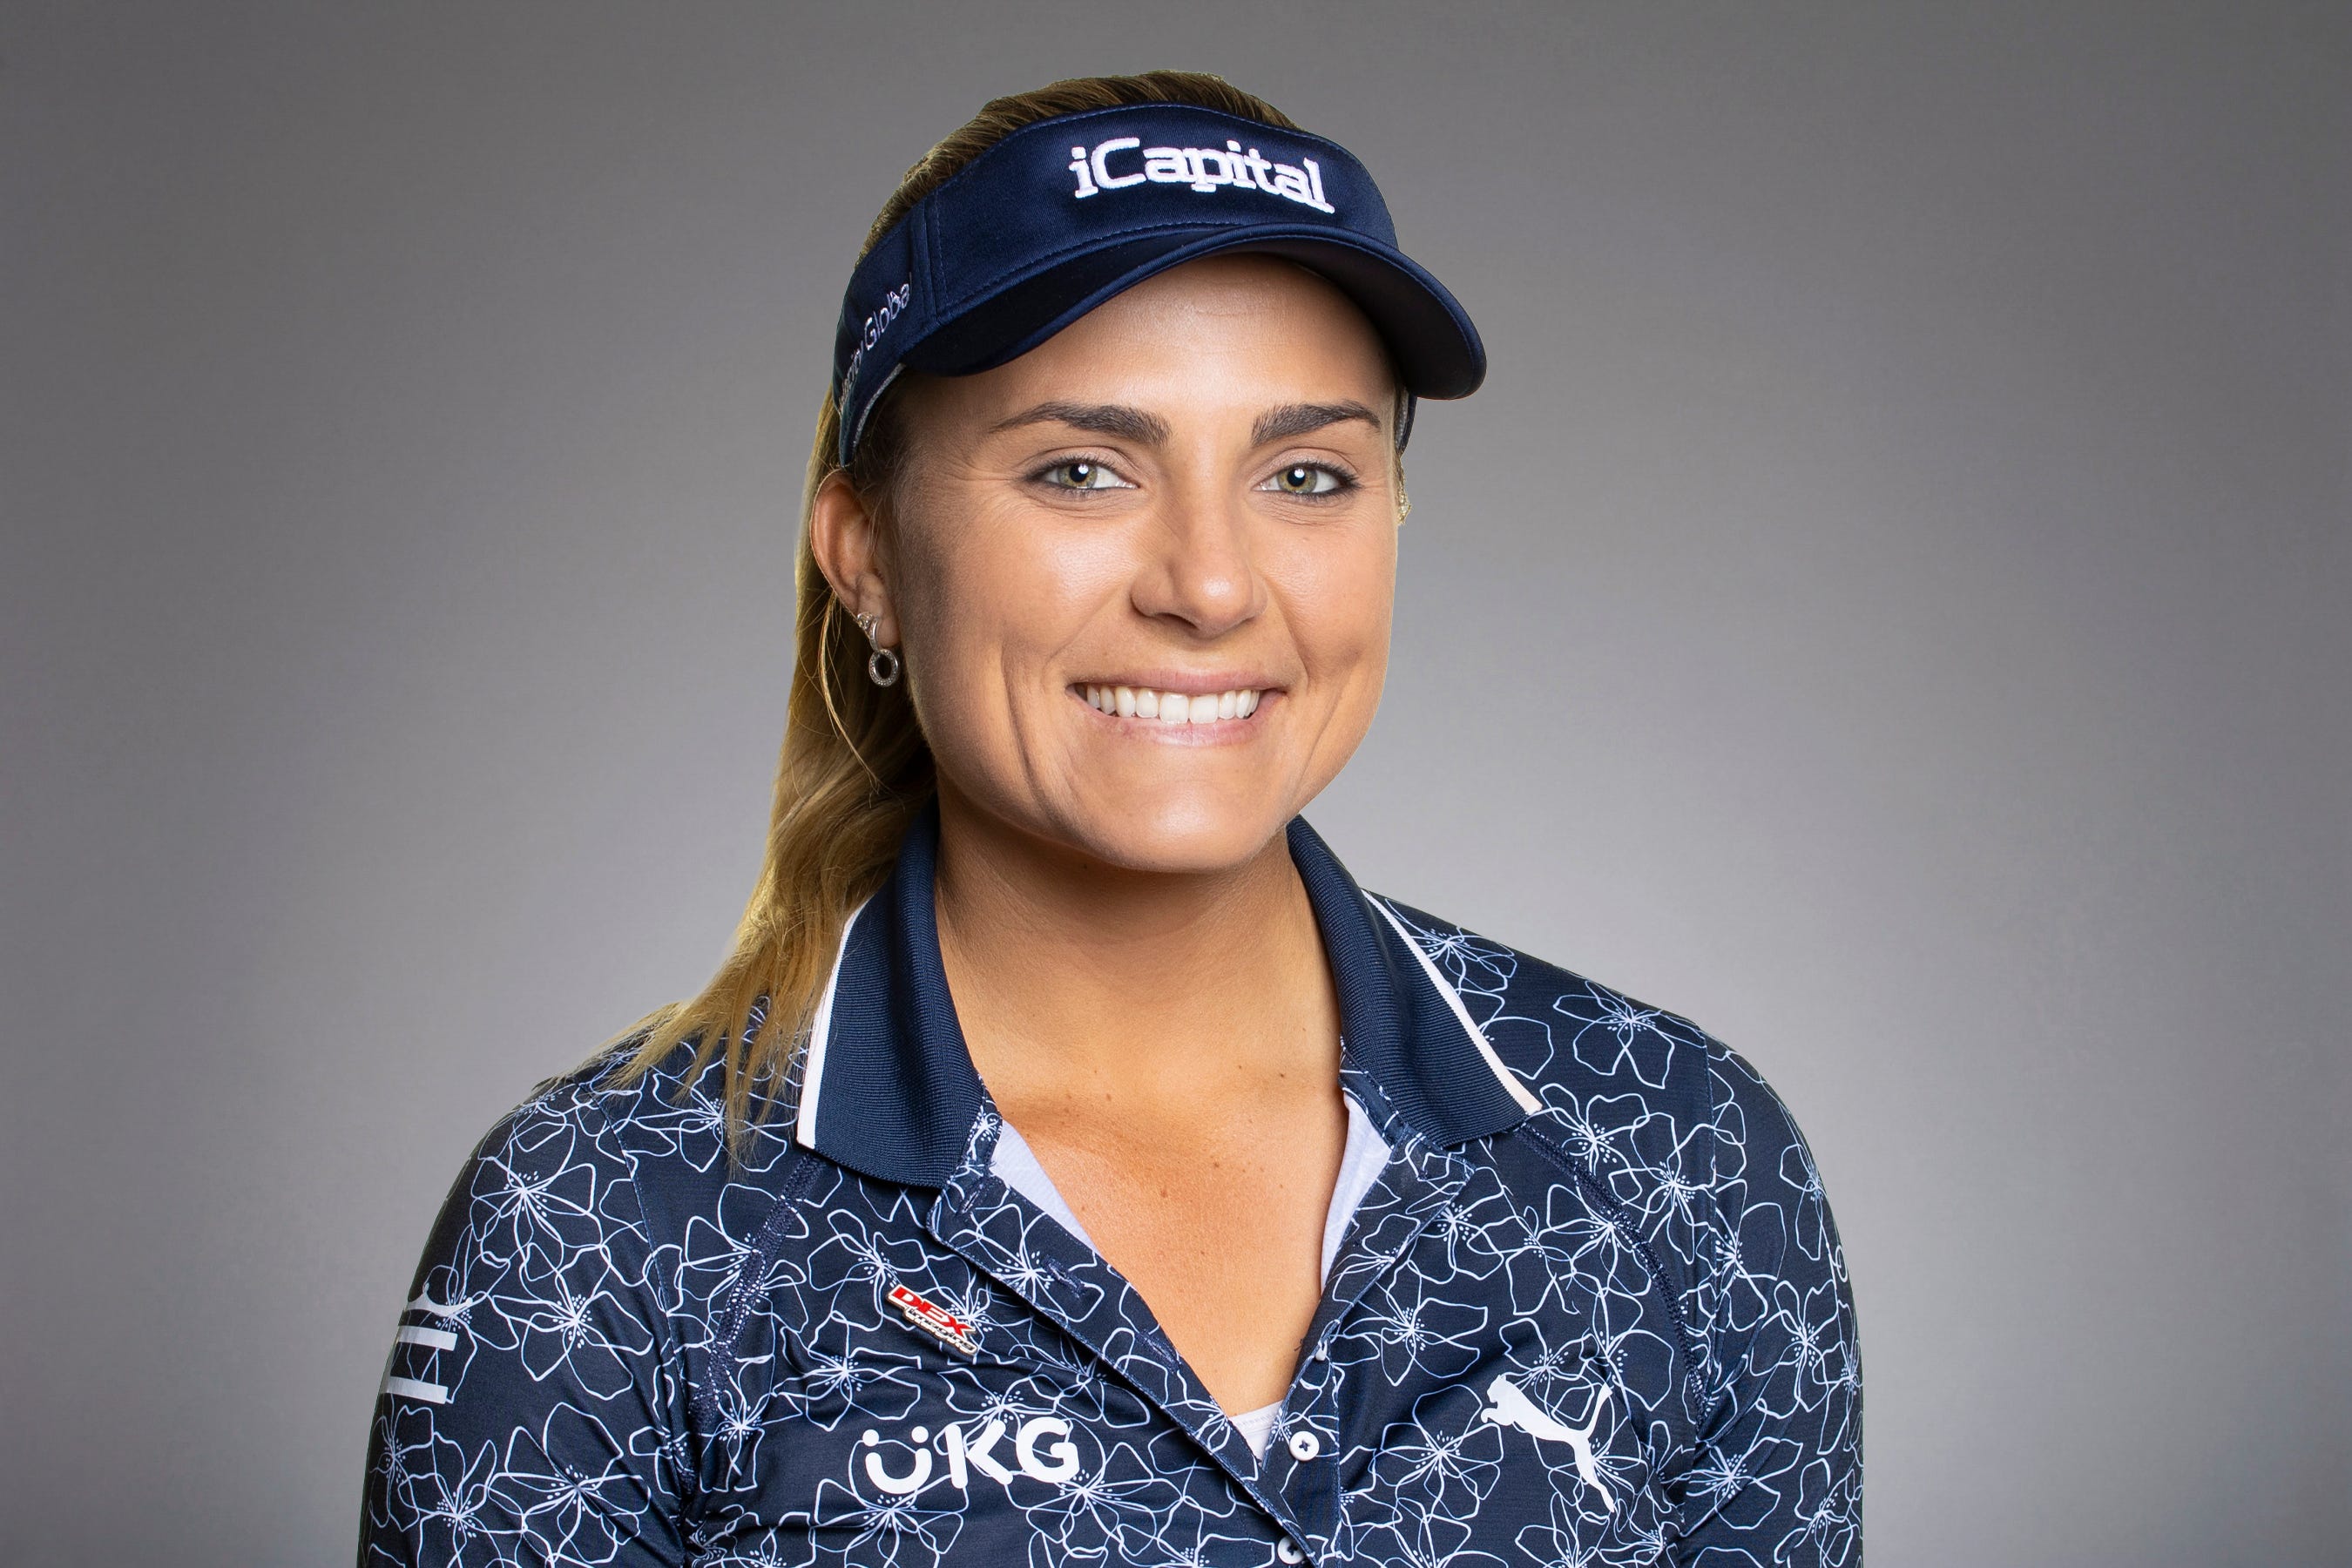 Lexi Thompson didn't earn a check, but rather the golf world's admiration